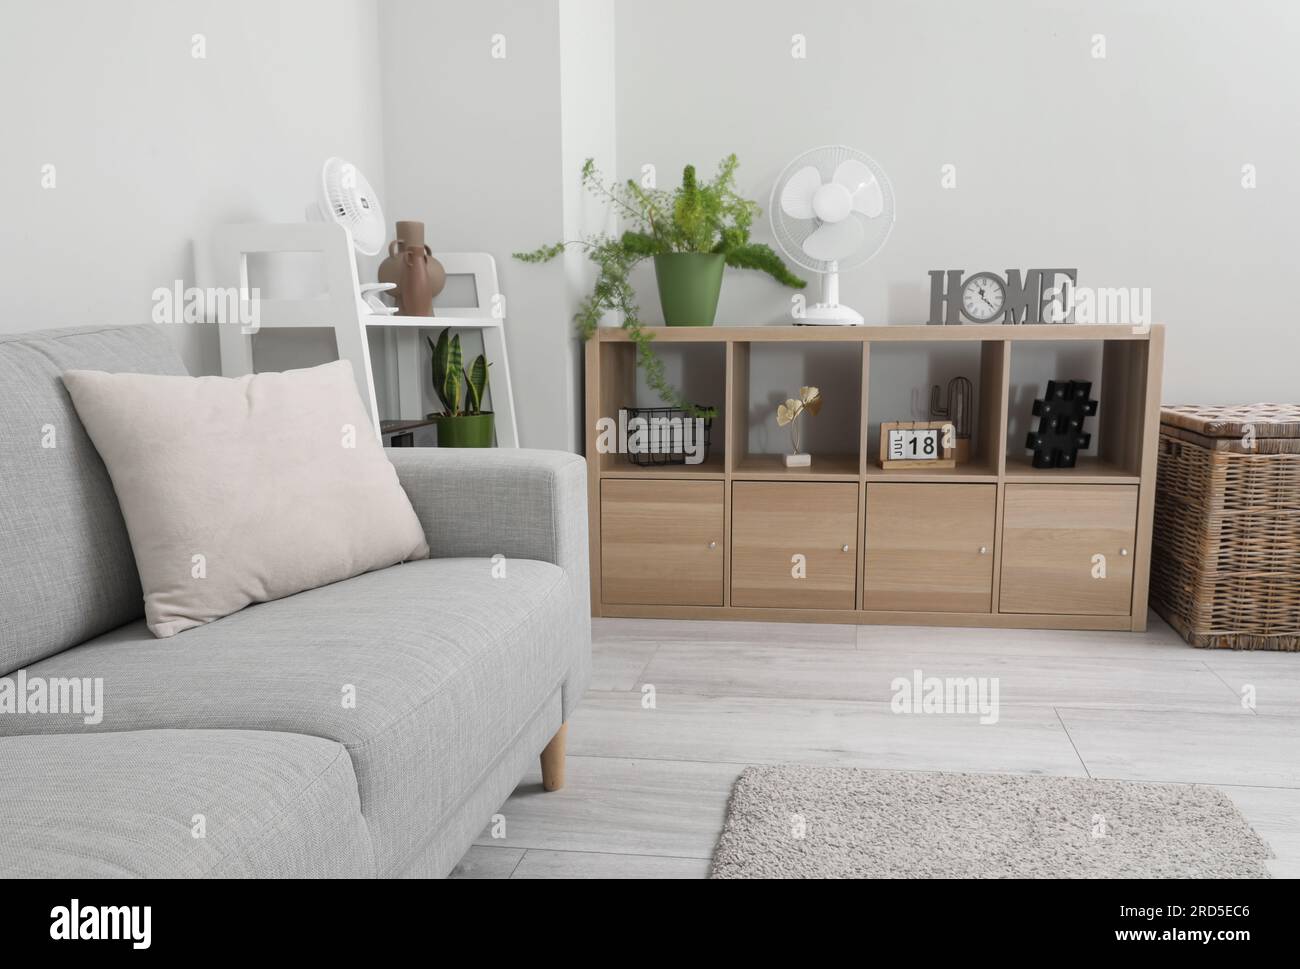 Interior of light living room with clock, houseplant and modern fan on shelving unit Stock Photo